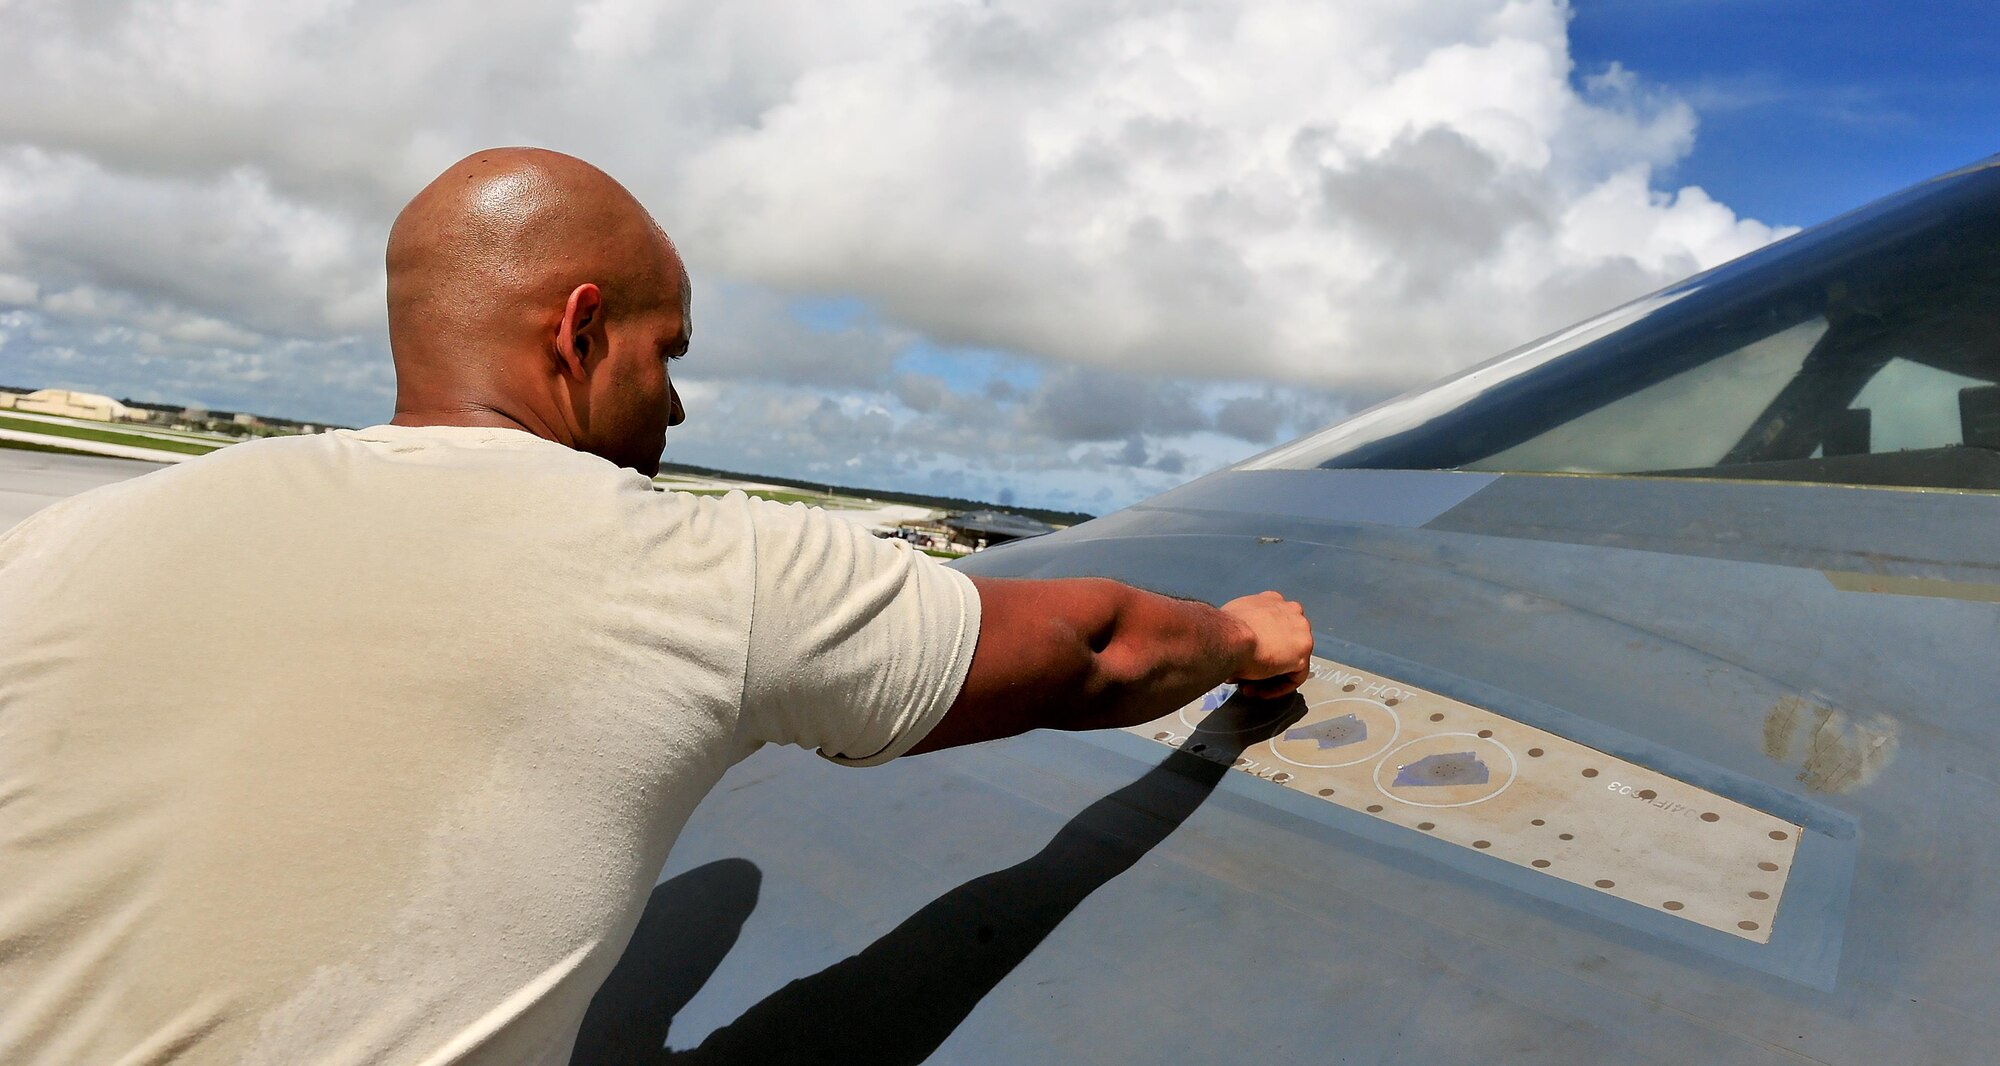 U.S. Air Force Senior Airman Julian Tobin, an aerospace repair technician with the 509th Maintenance Squadron, tapes off sections of a B-2 Spirit from Whiteman Air Force Base, Mo., Aug. 10, 216 at Andersen Air Force Base, Guam. The U.S. routinely and visibly demonstrates its commitment to its allies and partners through the global operations of our military forces. (U.S. Air Force photo by Senior Airman Jovan Banks)